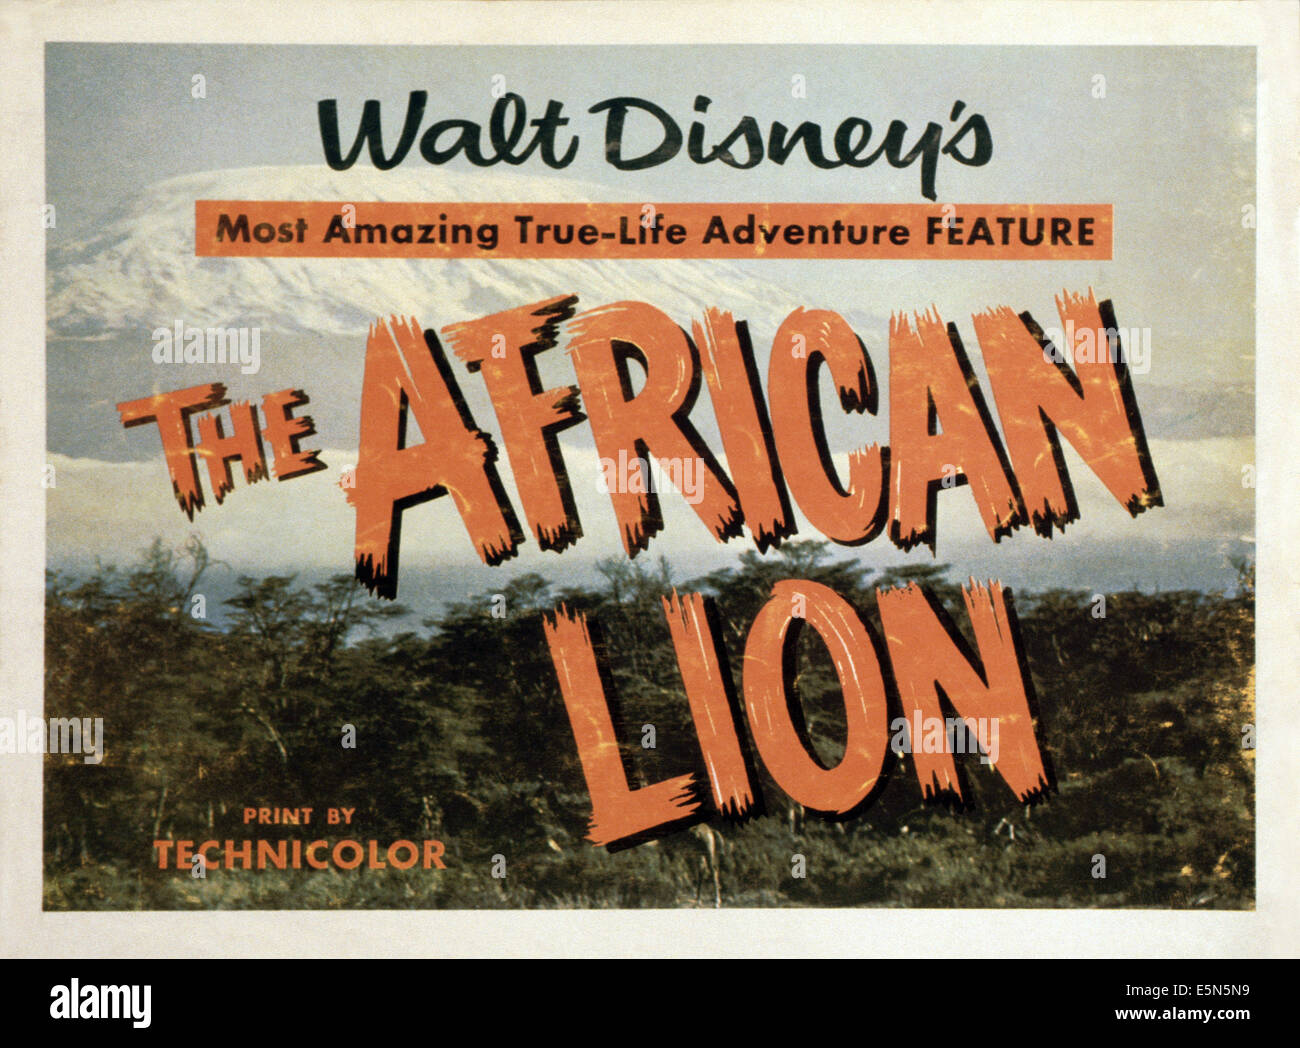 THE AFRICAN LION, 1955 Stock Photo